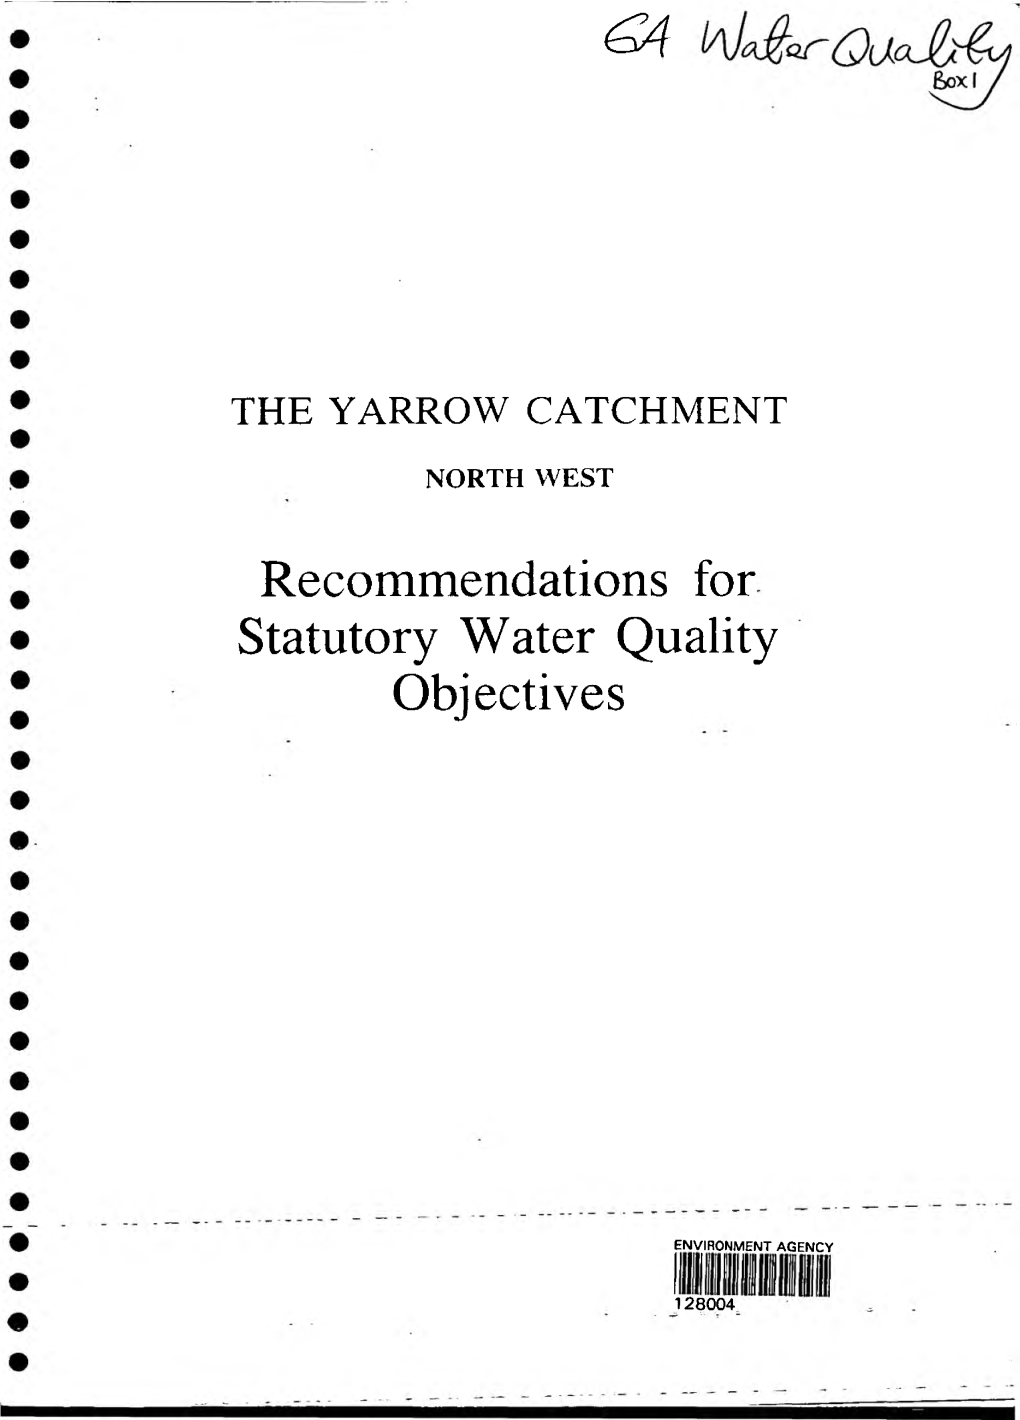 Recommendations for Statutory Water Quality Objectives